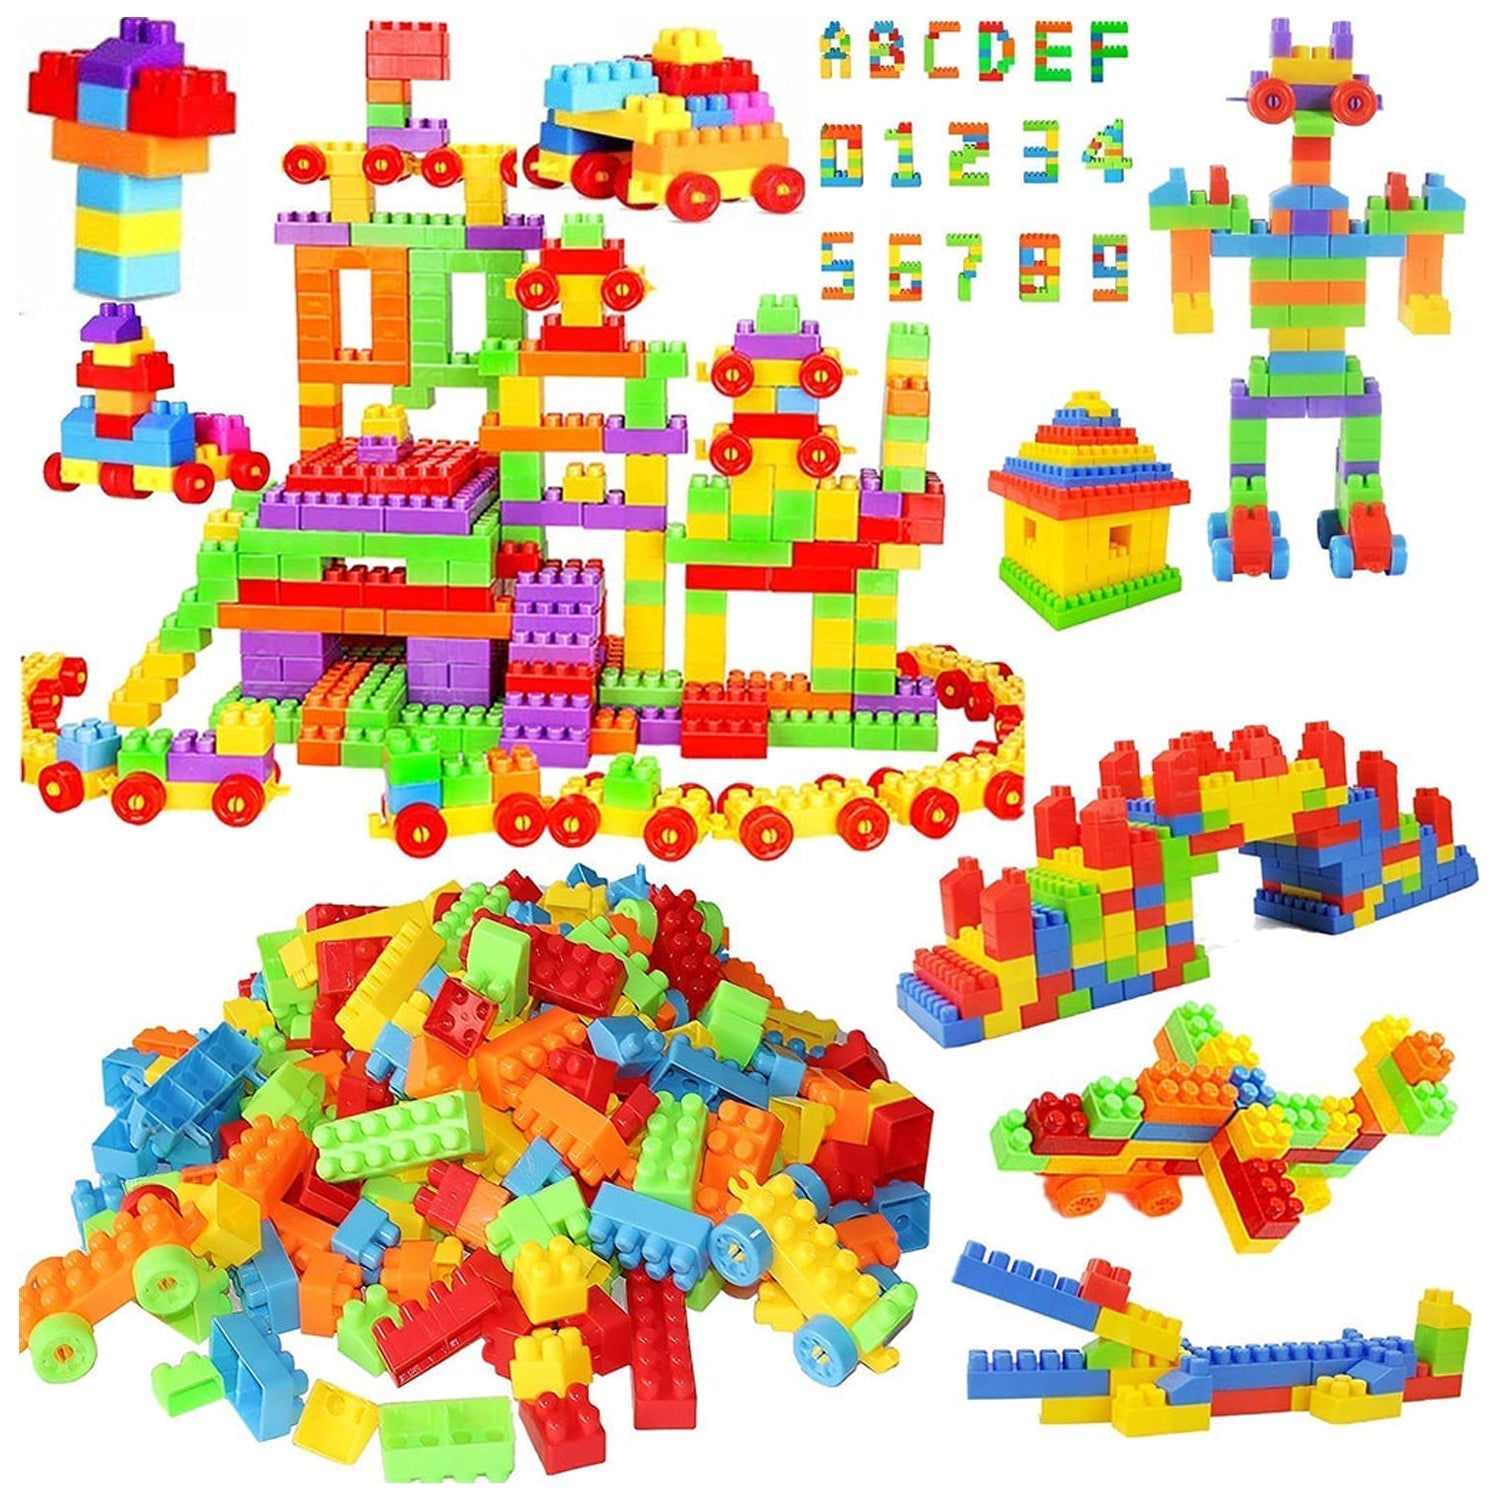 3914 100 Pc Train Blocks Toy used in all kinds of household and official places specially for kids and children for their playing and enjoying purposes.